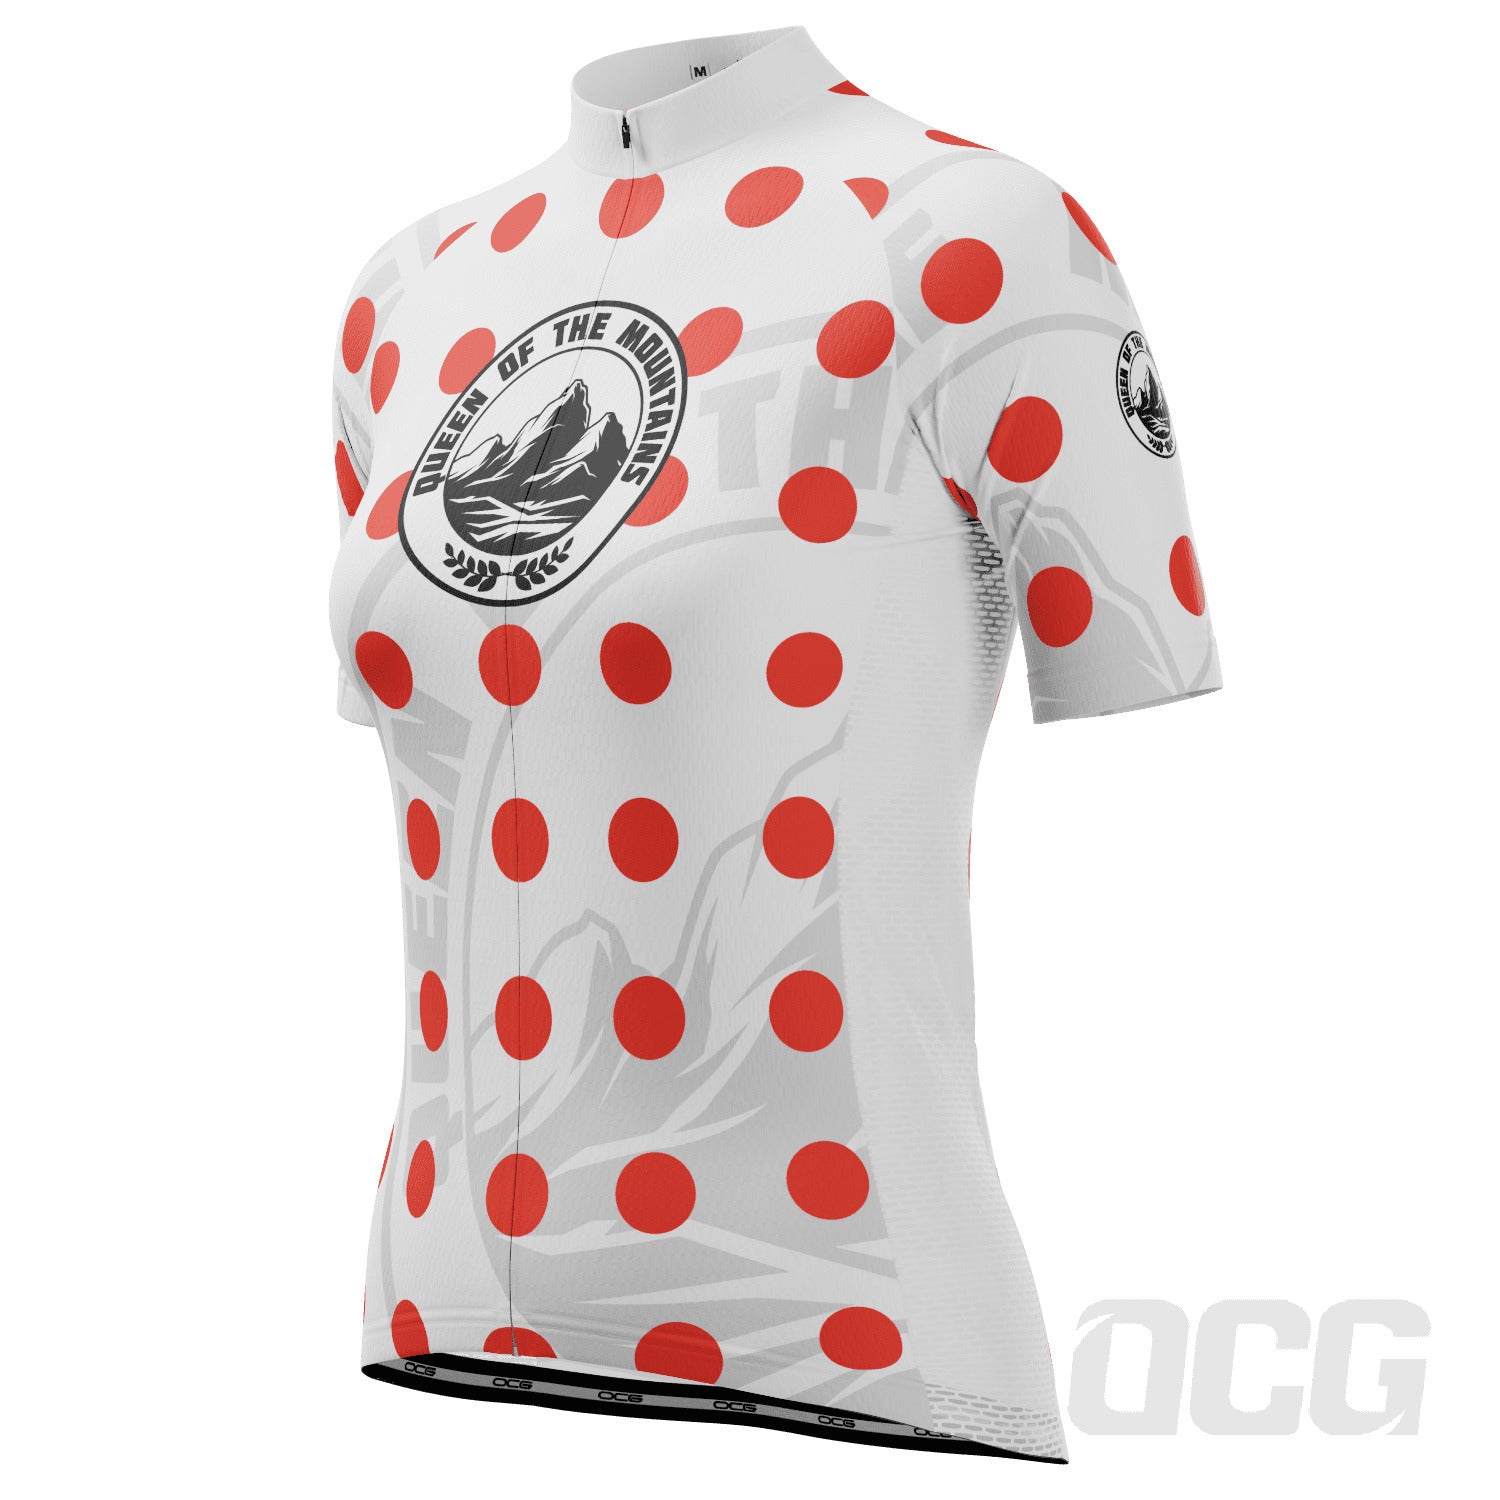 Women's King of the Mountains Polka Dot Short Sleeve Cycling Jersey